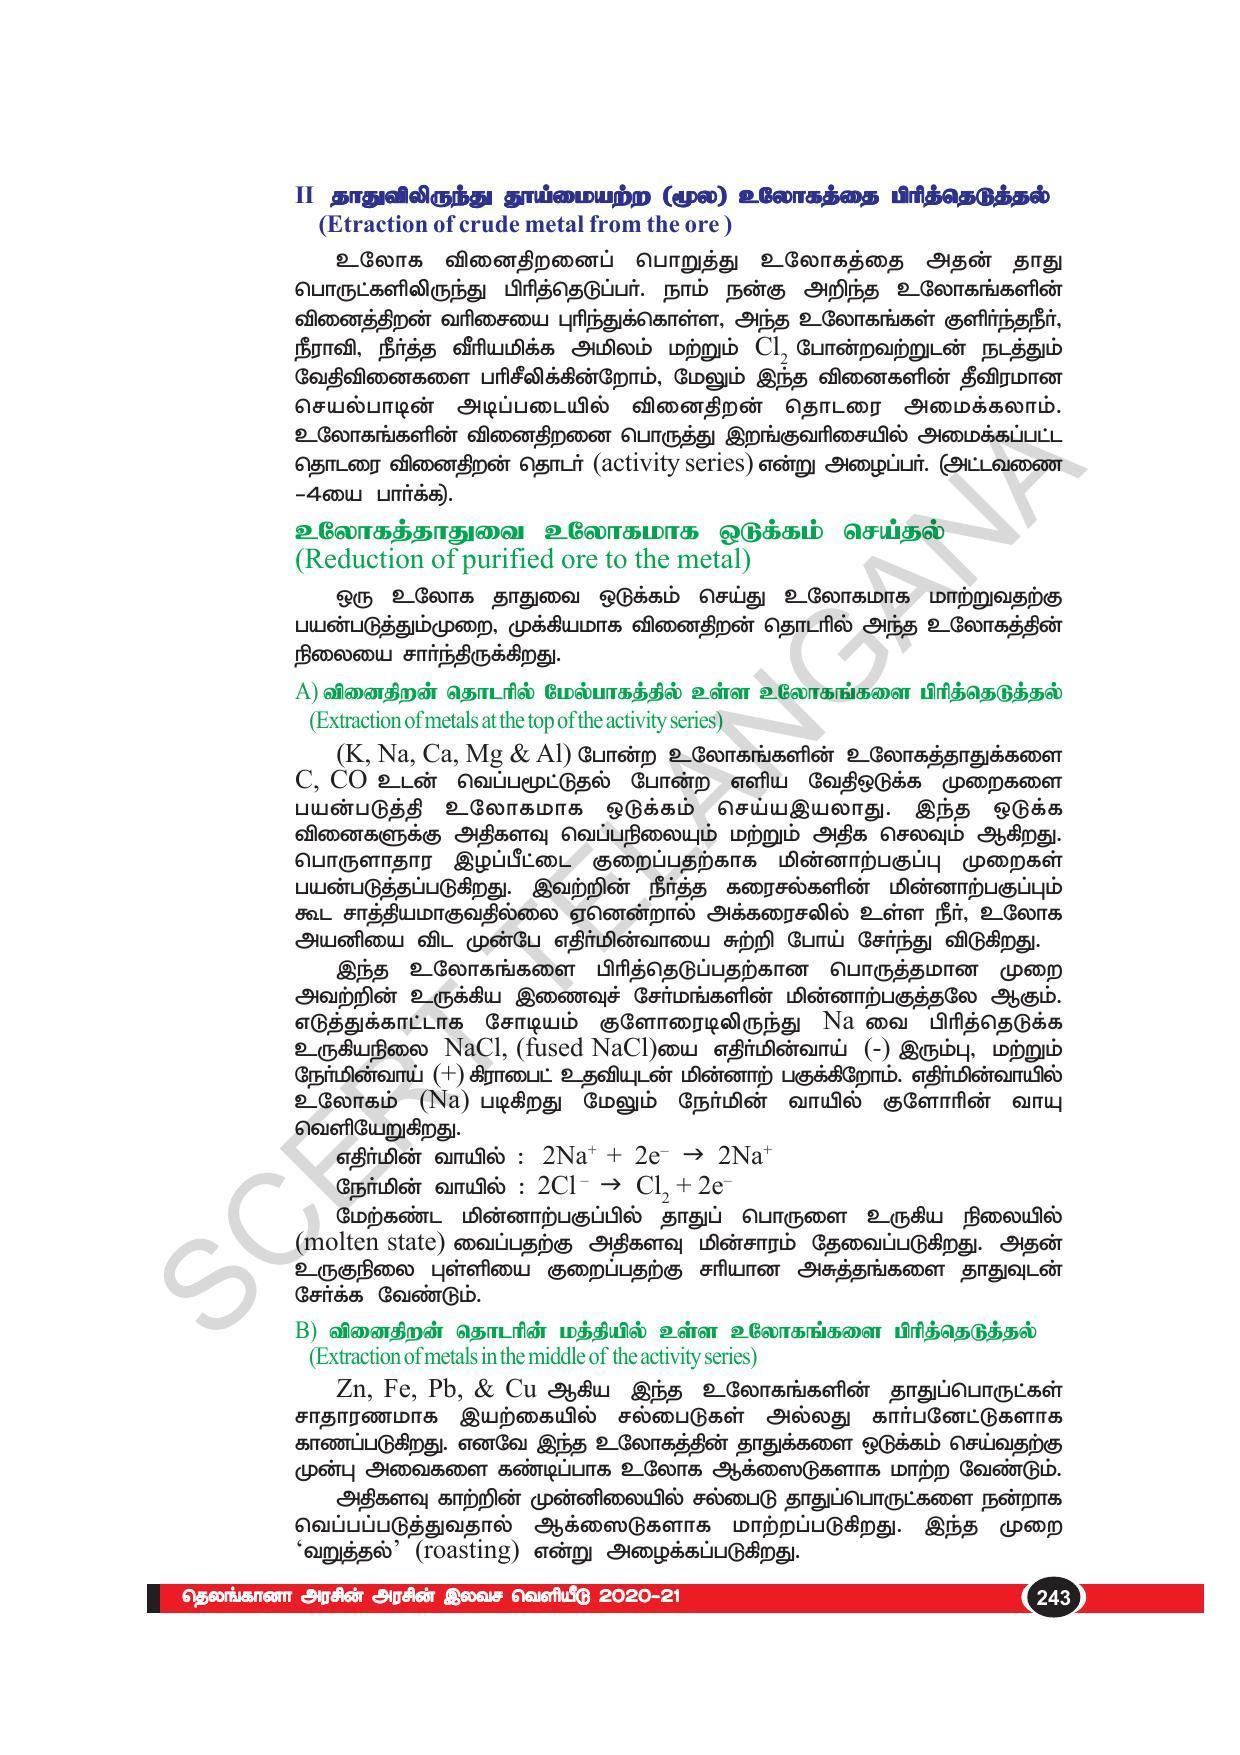 TS SCERT Class 10 Physical Science(Tamil Medium) Text Book - Page 255